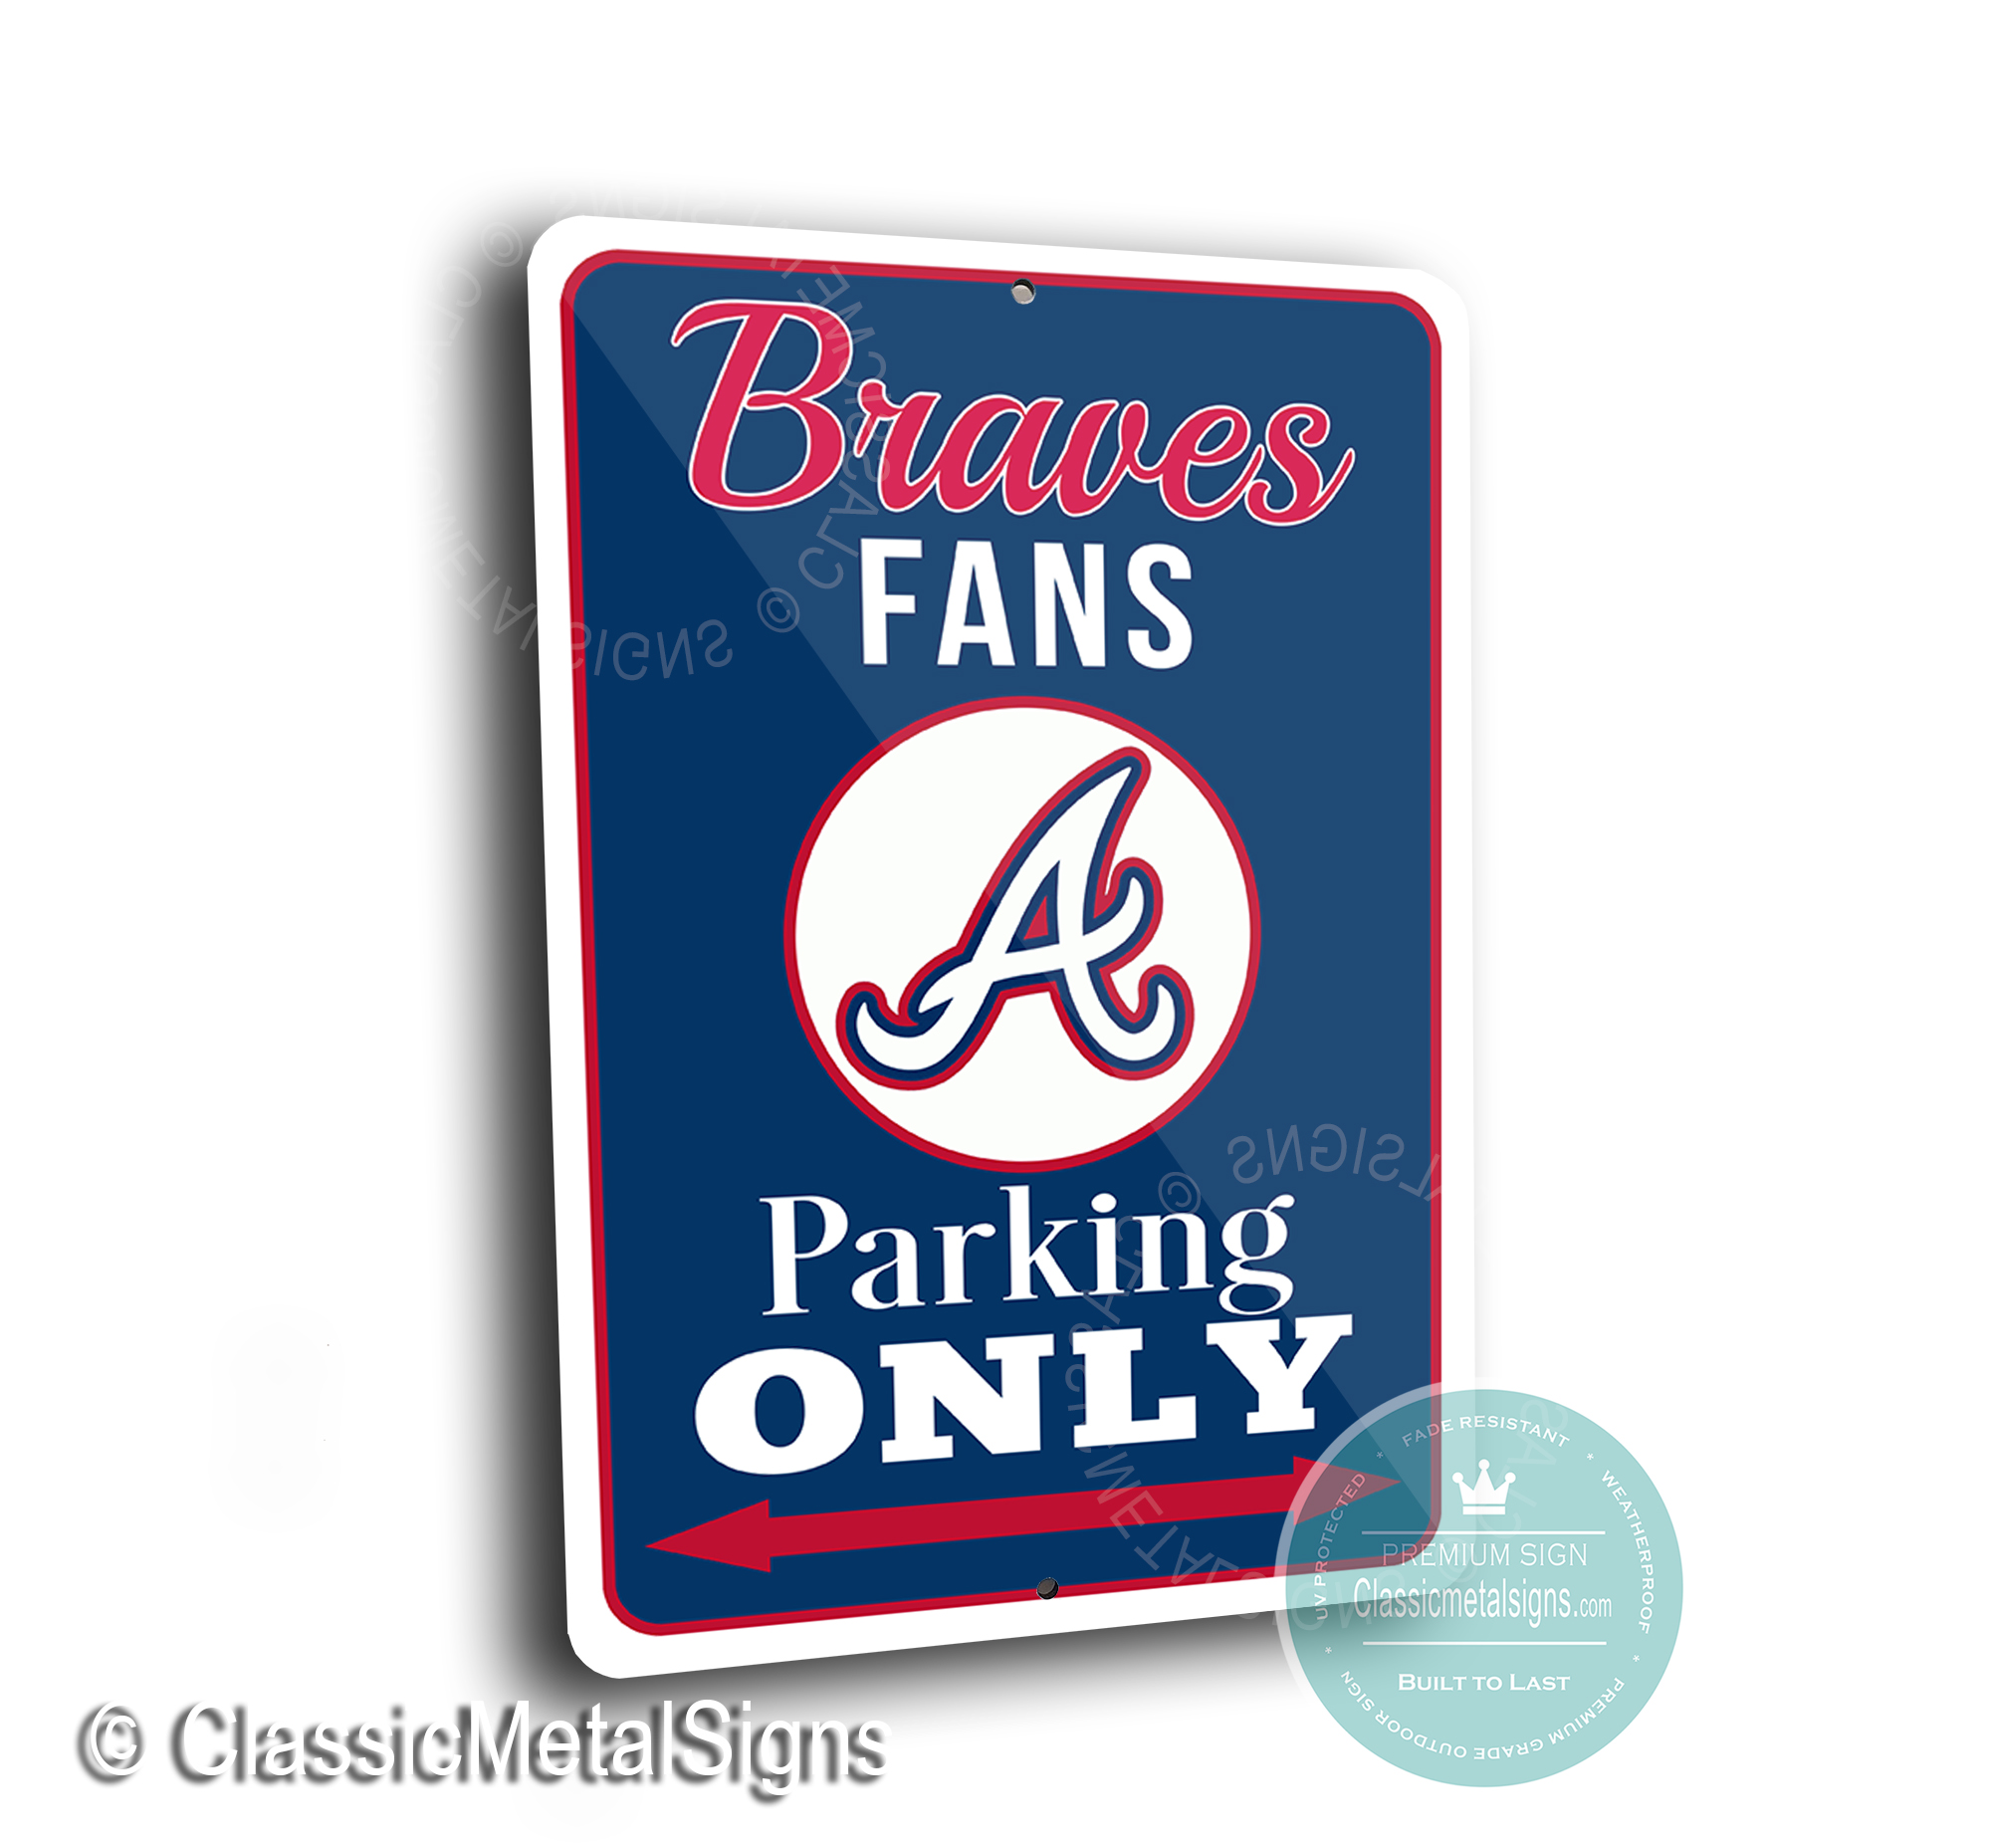 Atlanta Braves Parking Only Signs